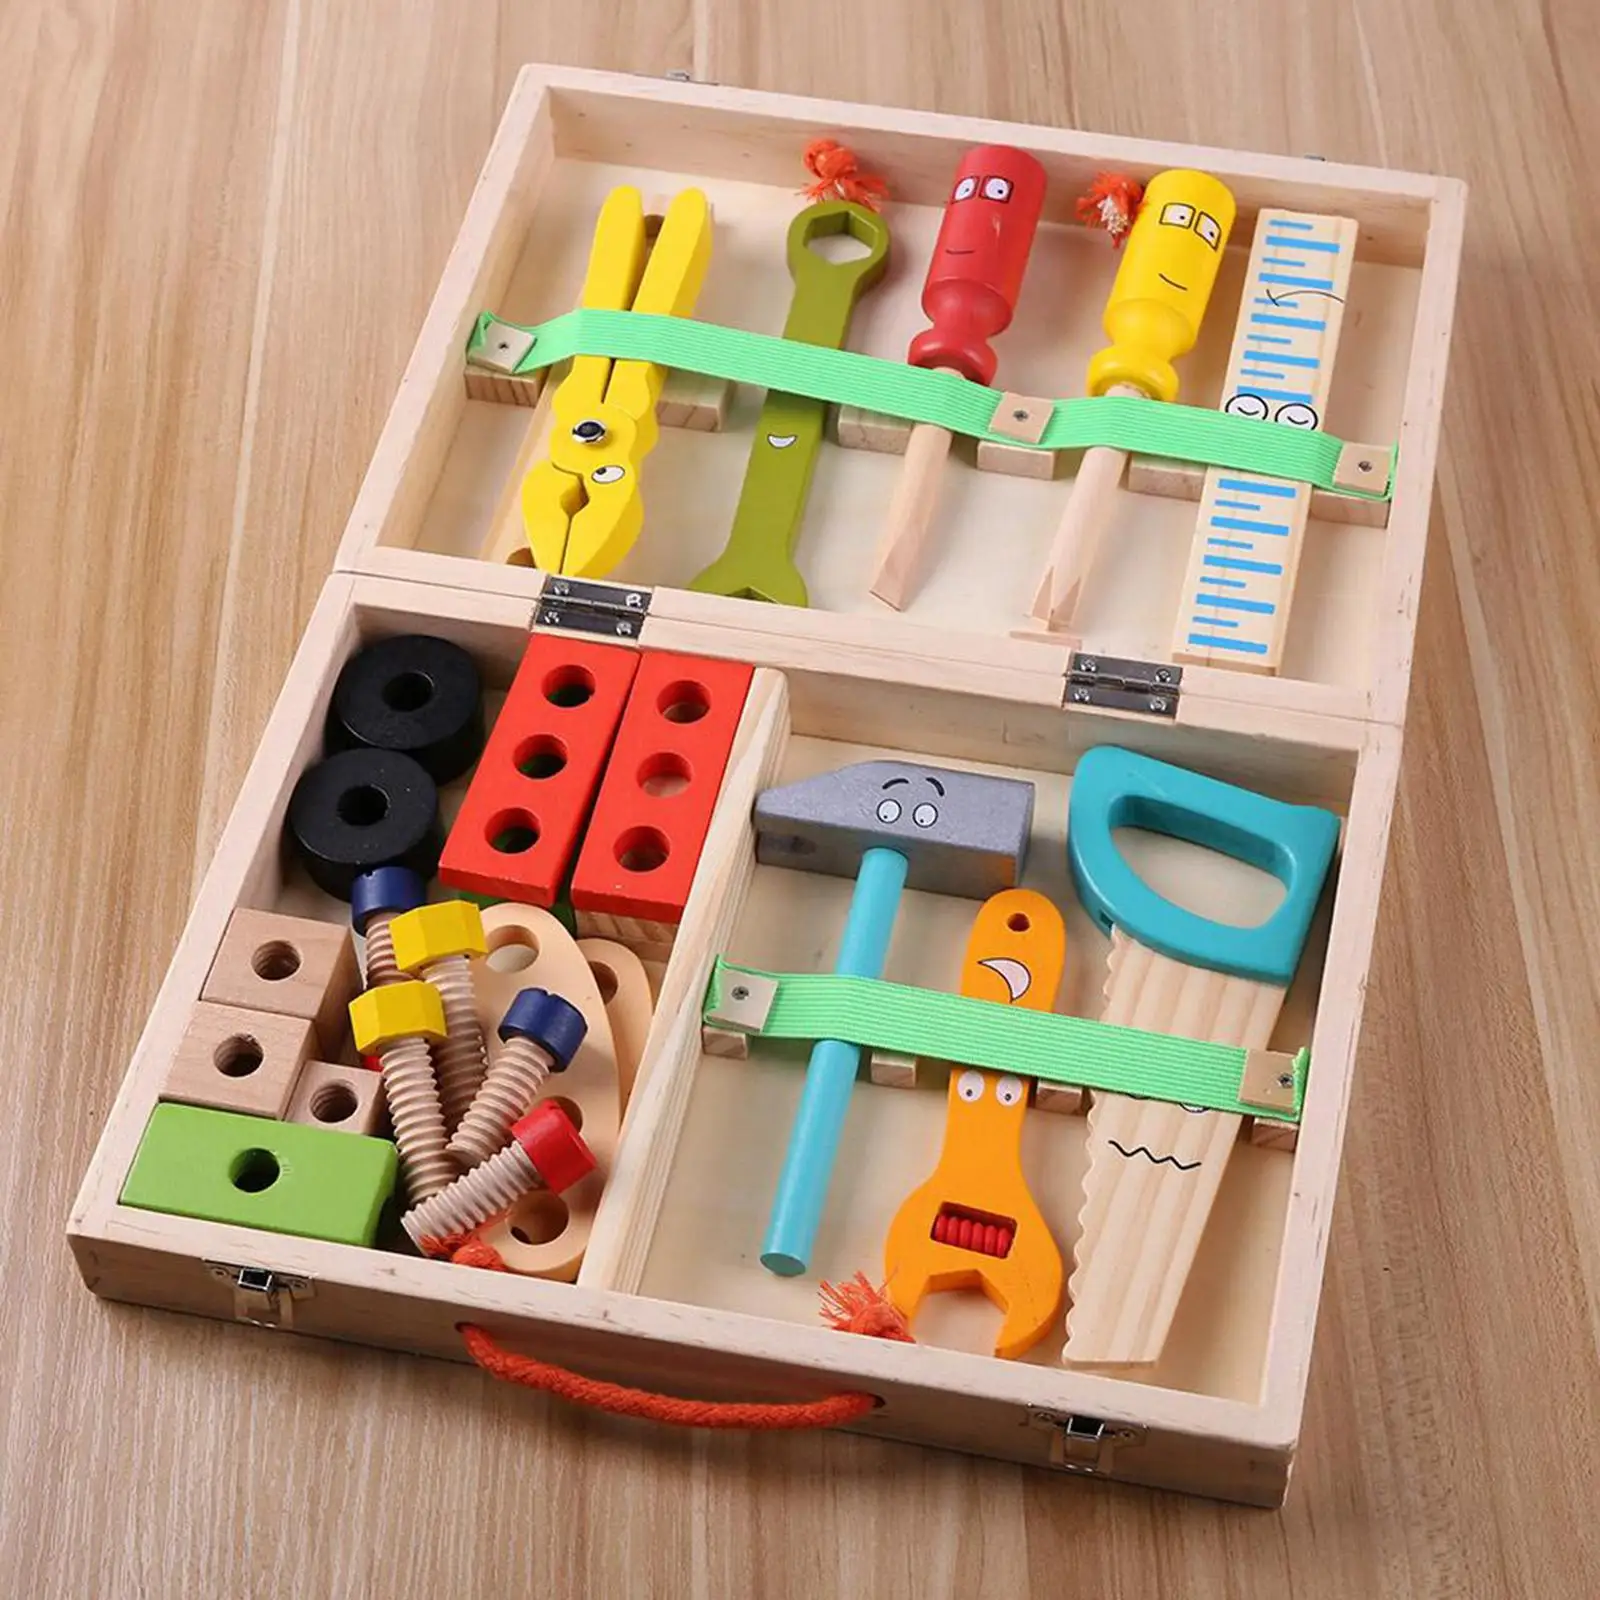 Wooden Tool Set Children Toy Building Kit Role Play Gift for 